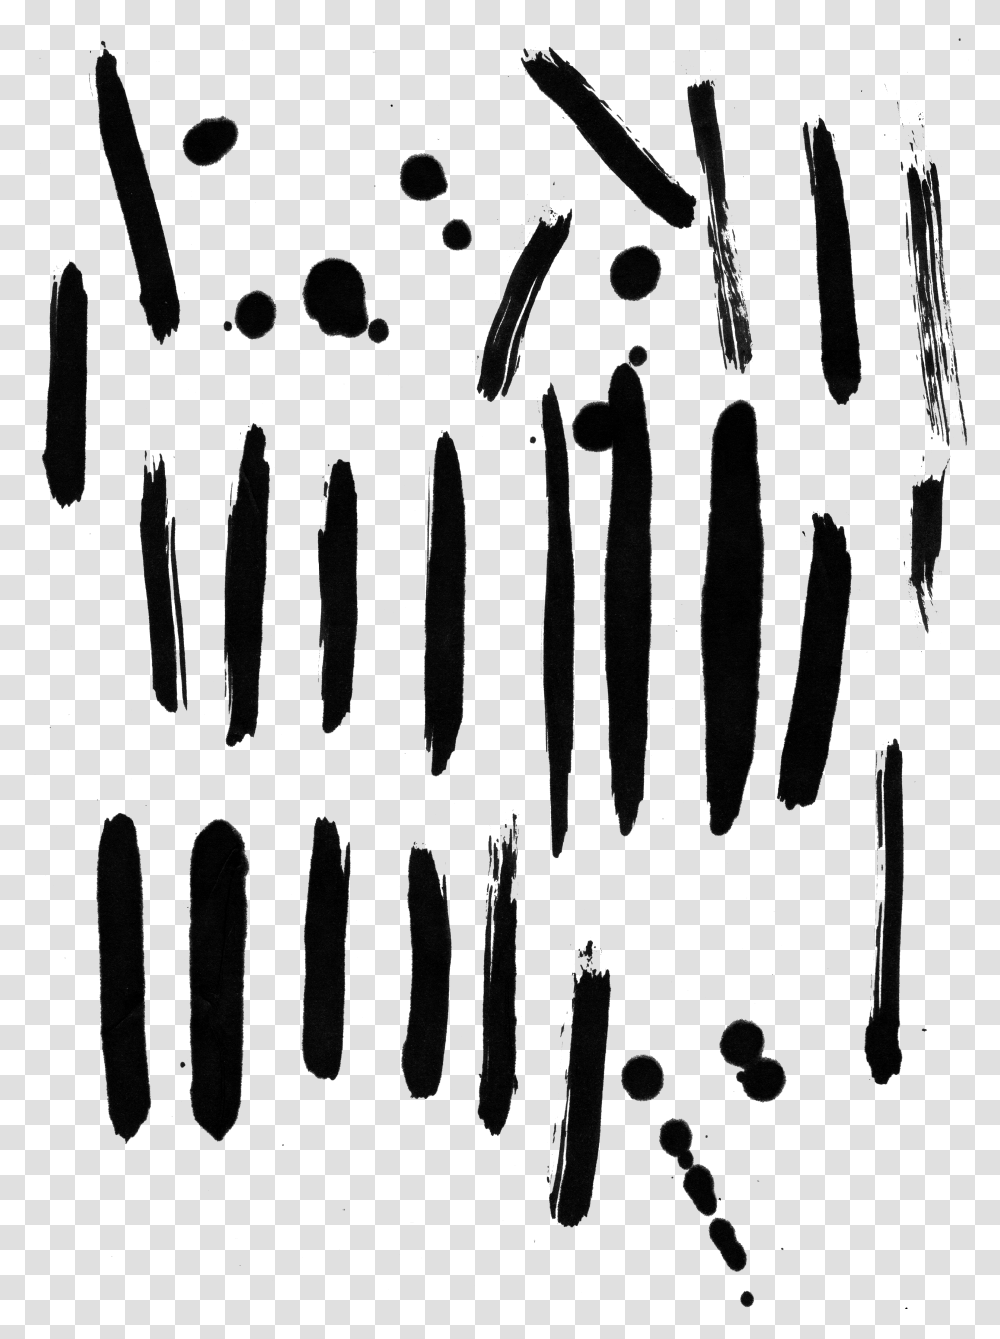 Brush Strokes Ink Blots Free Image Cool Video Intro Transparent Png